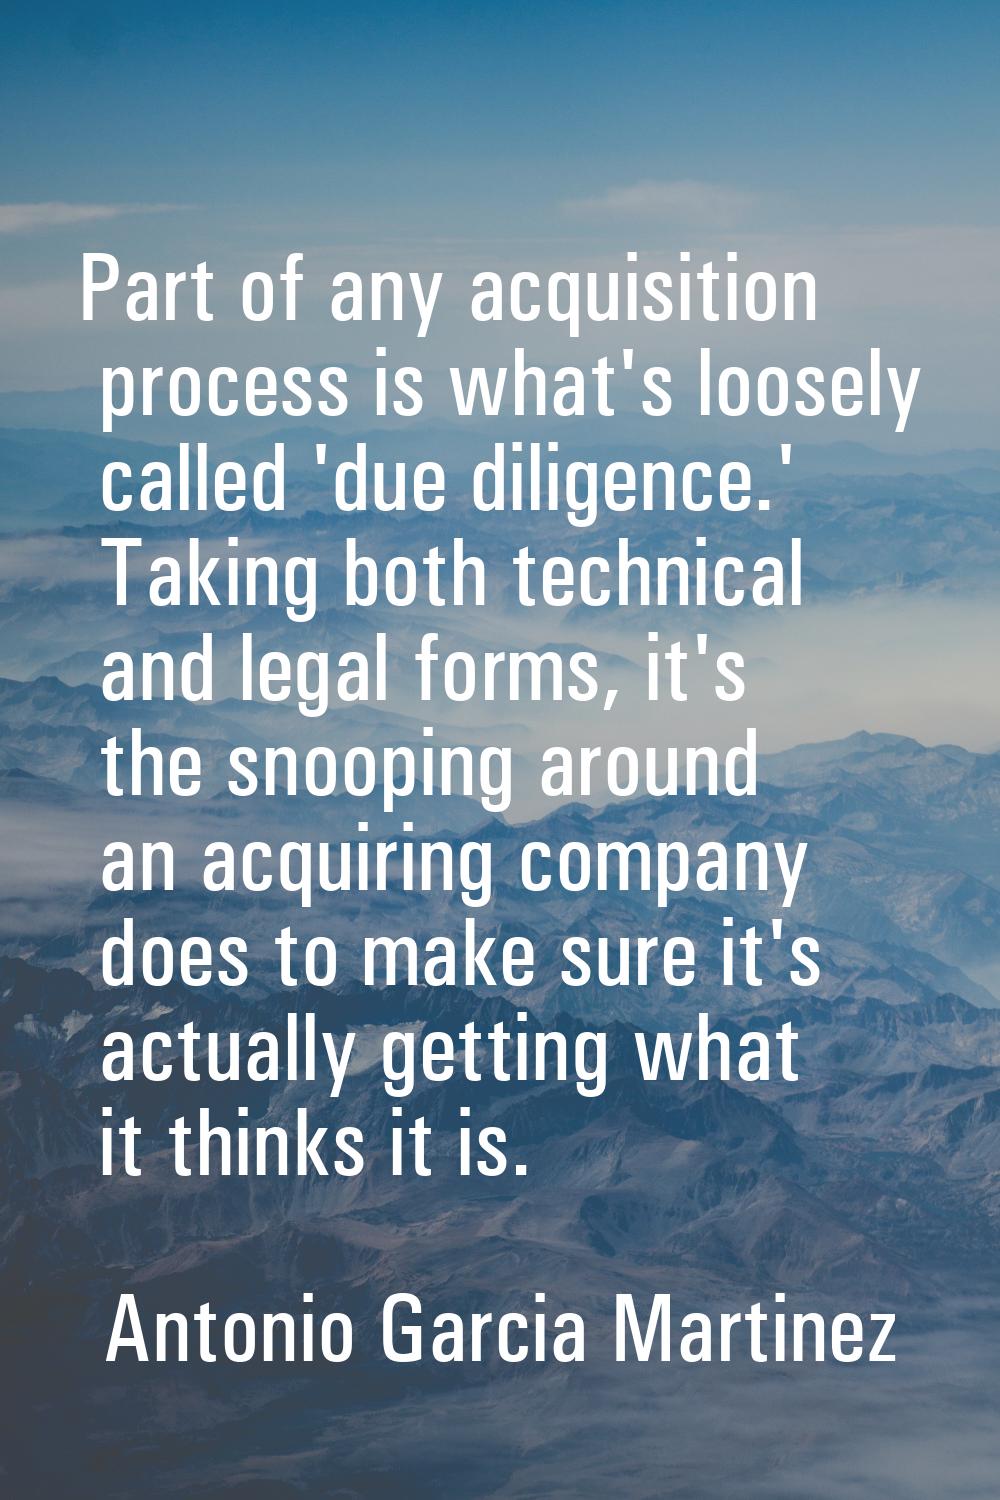 Part of any acquisition process is what's loosely called 'due diligence.' Taking both technical and